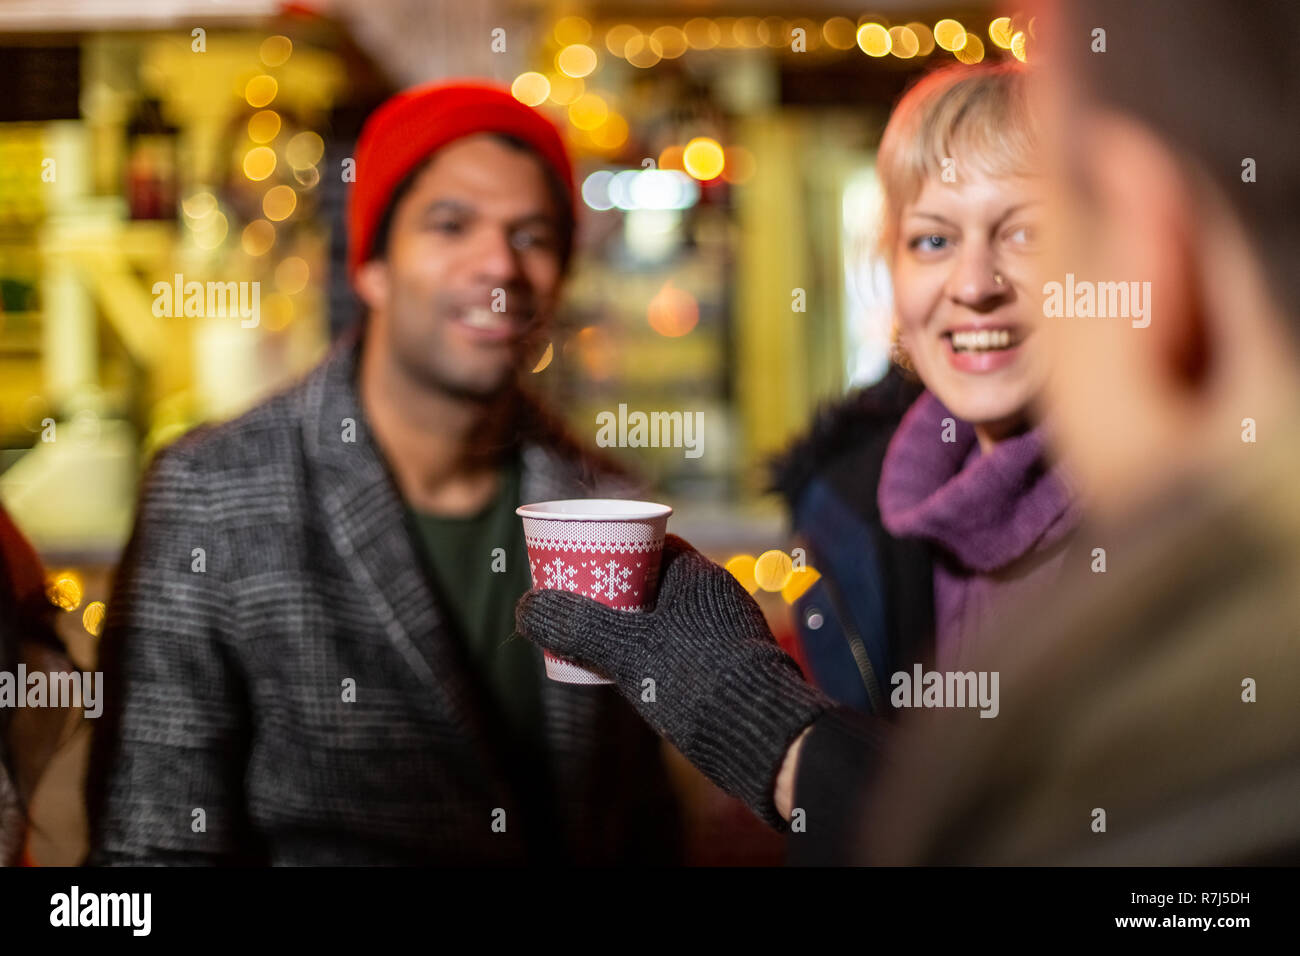 Close up image of man cheering with friends at Christmas market, Zagreb, Croatia. Stock Photo